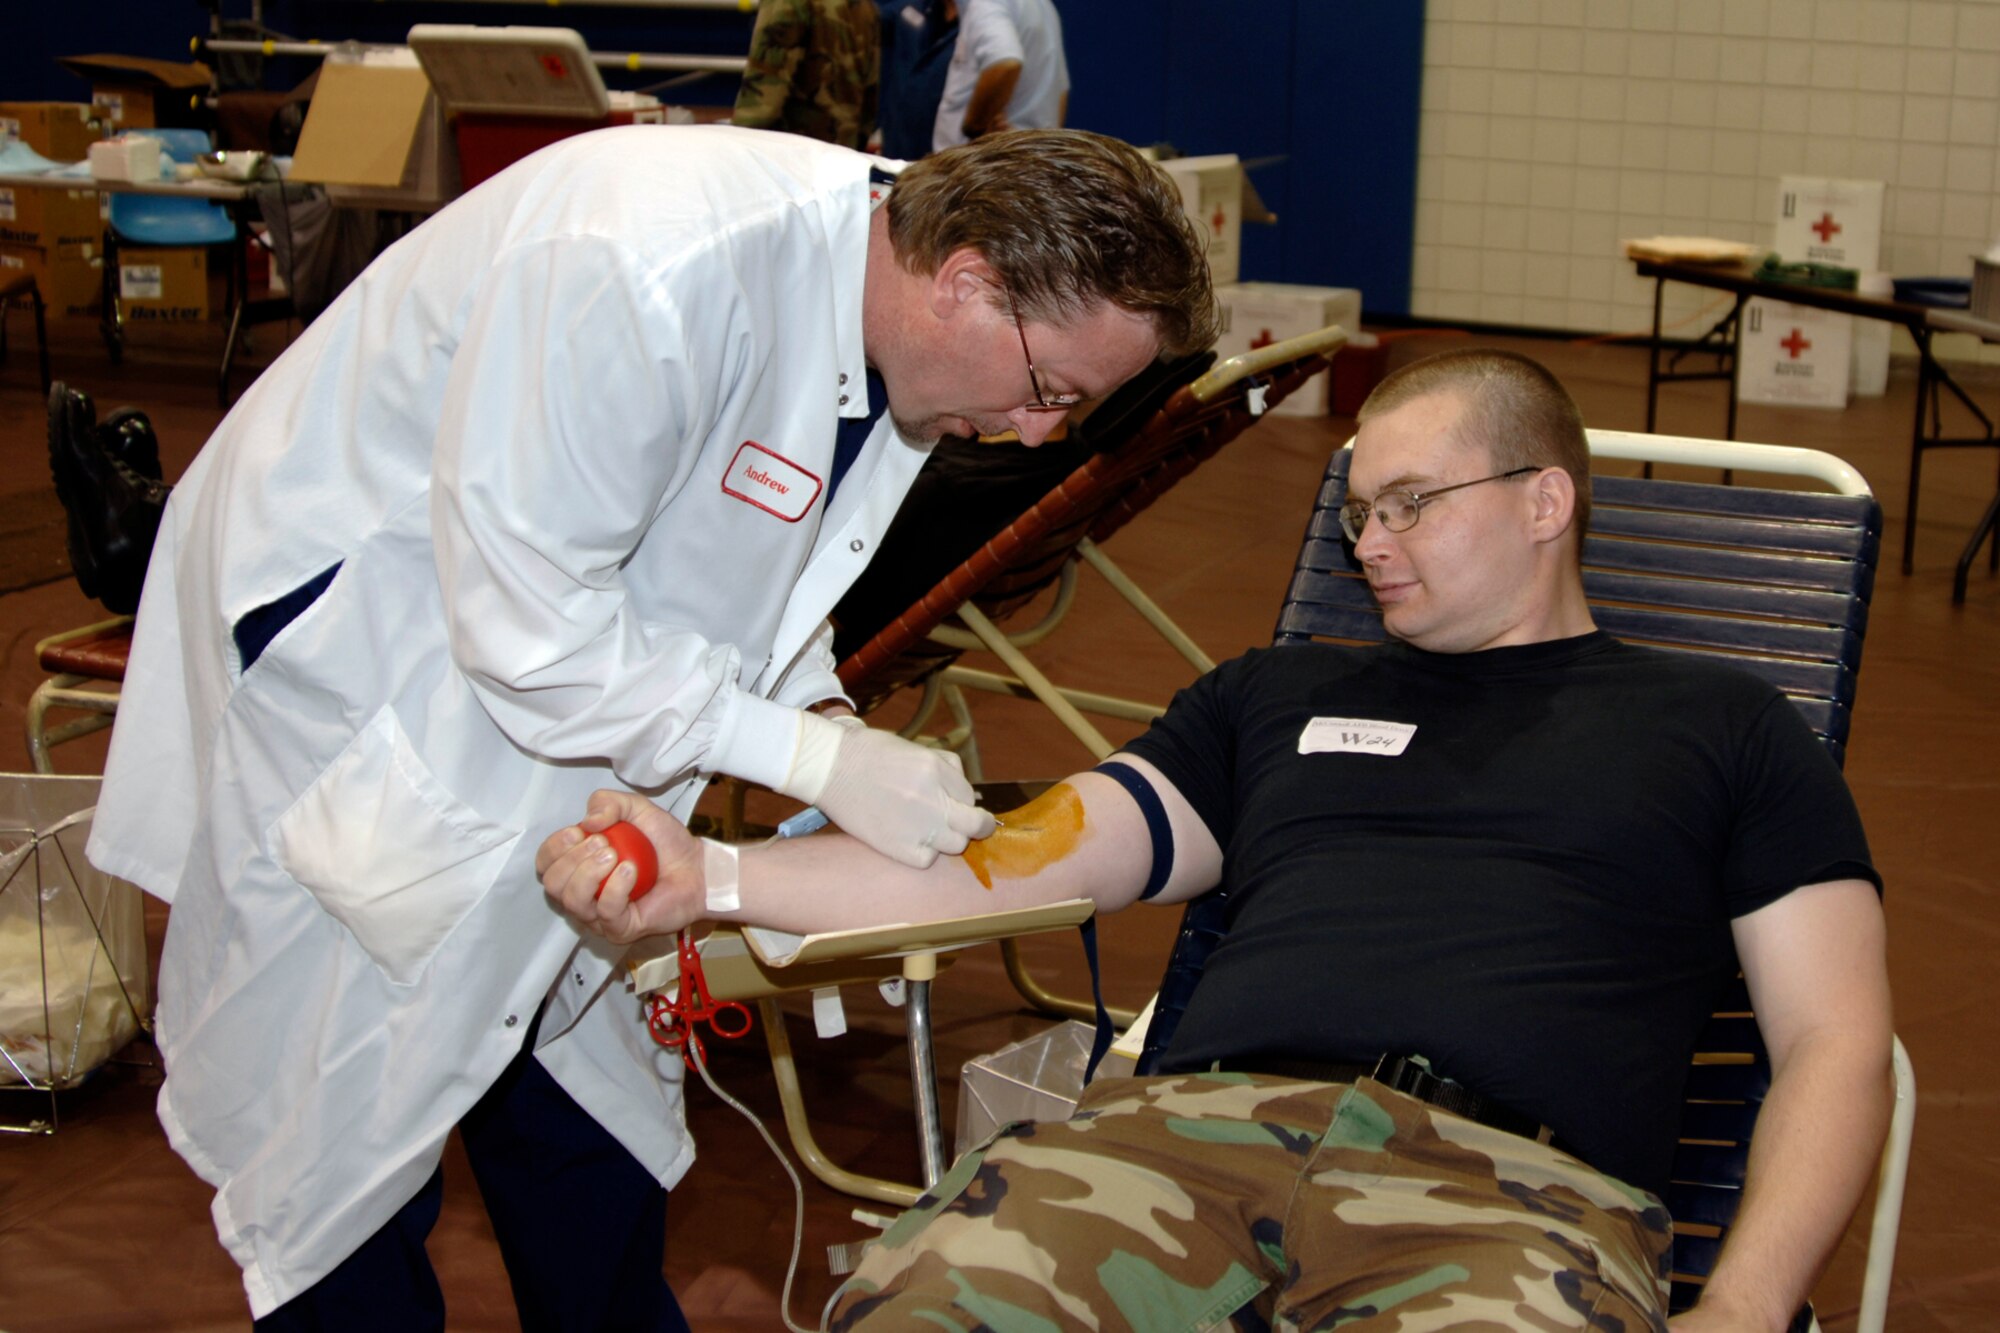 Andrew Brewer, a phlebotomist from a local chapter of the American Red Cross, draws blood from Airman 1st Class Roy Lynch, 22nd Communications Squadron May 11 during a blood drive in the fitness center gymnasium. (Photo by Senior Airman Jamie Train)